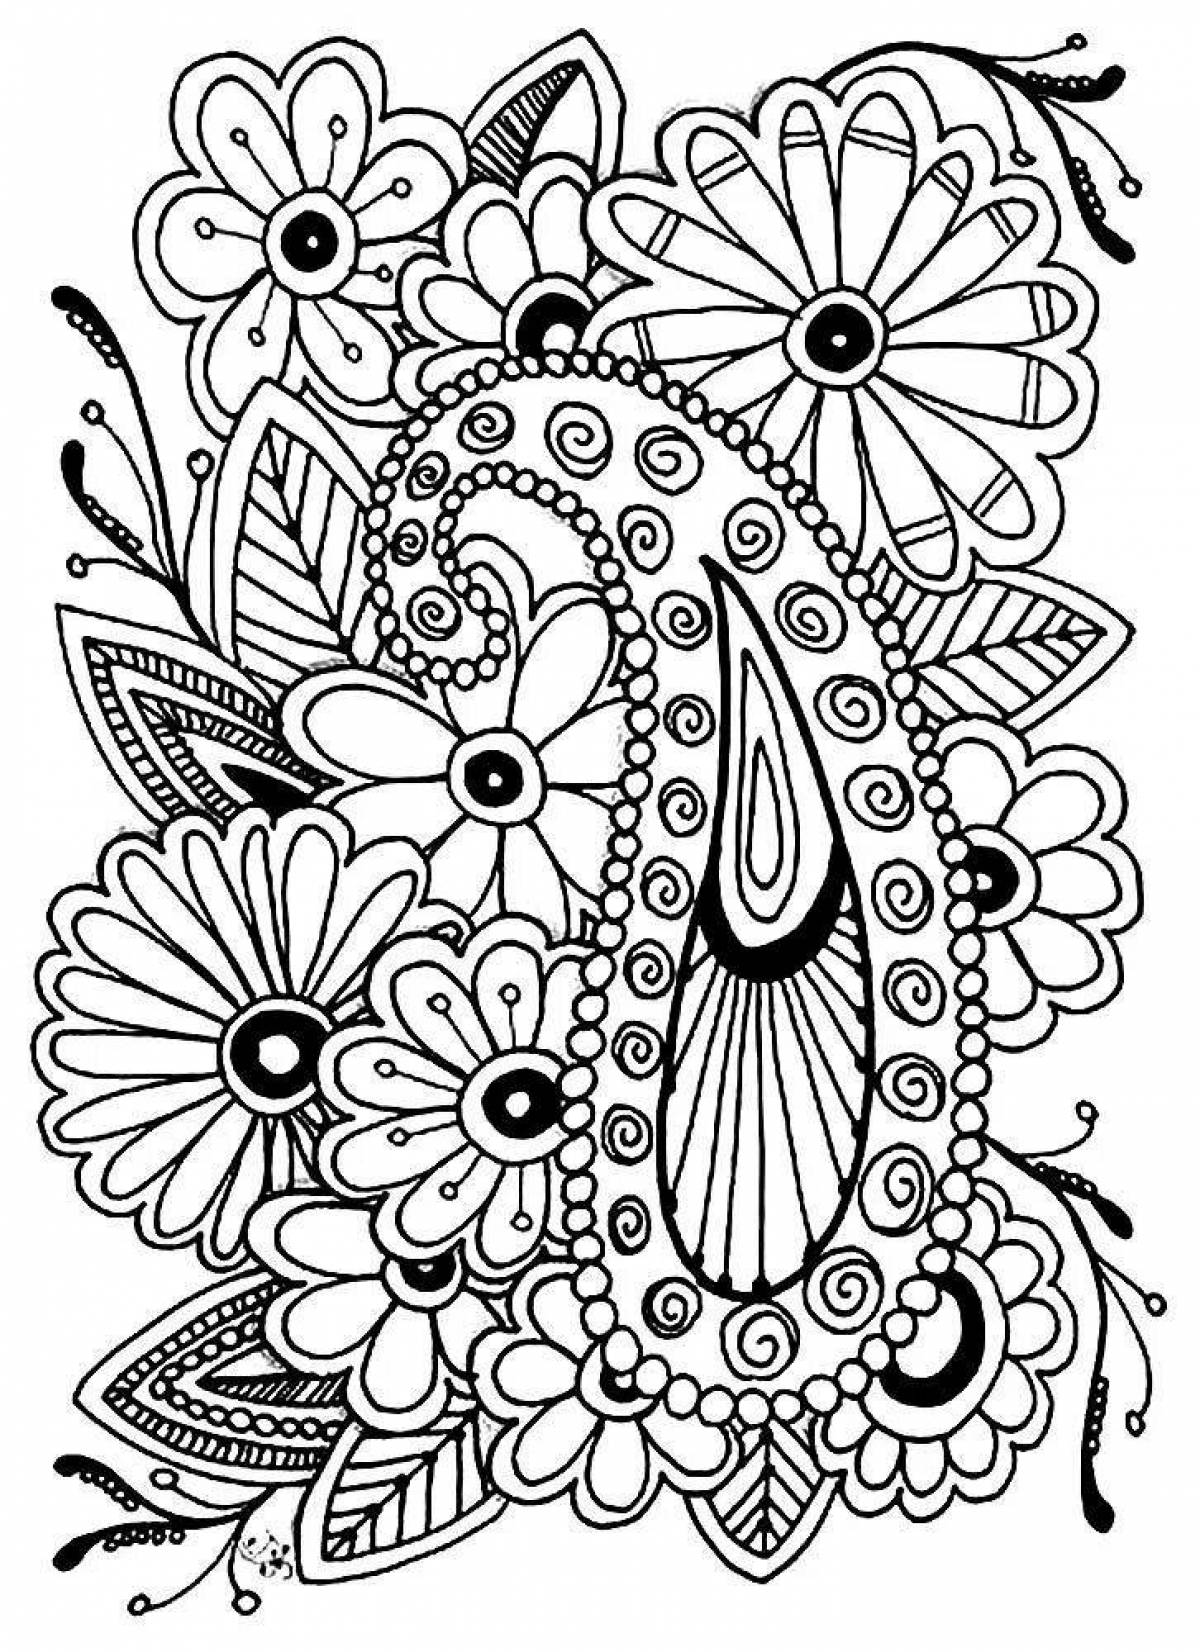 Great anti-stress art therapy coloring book